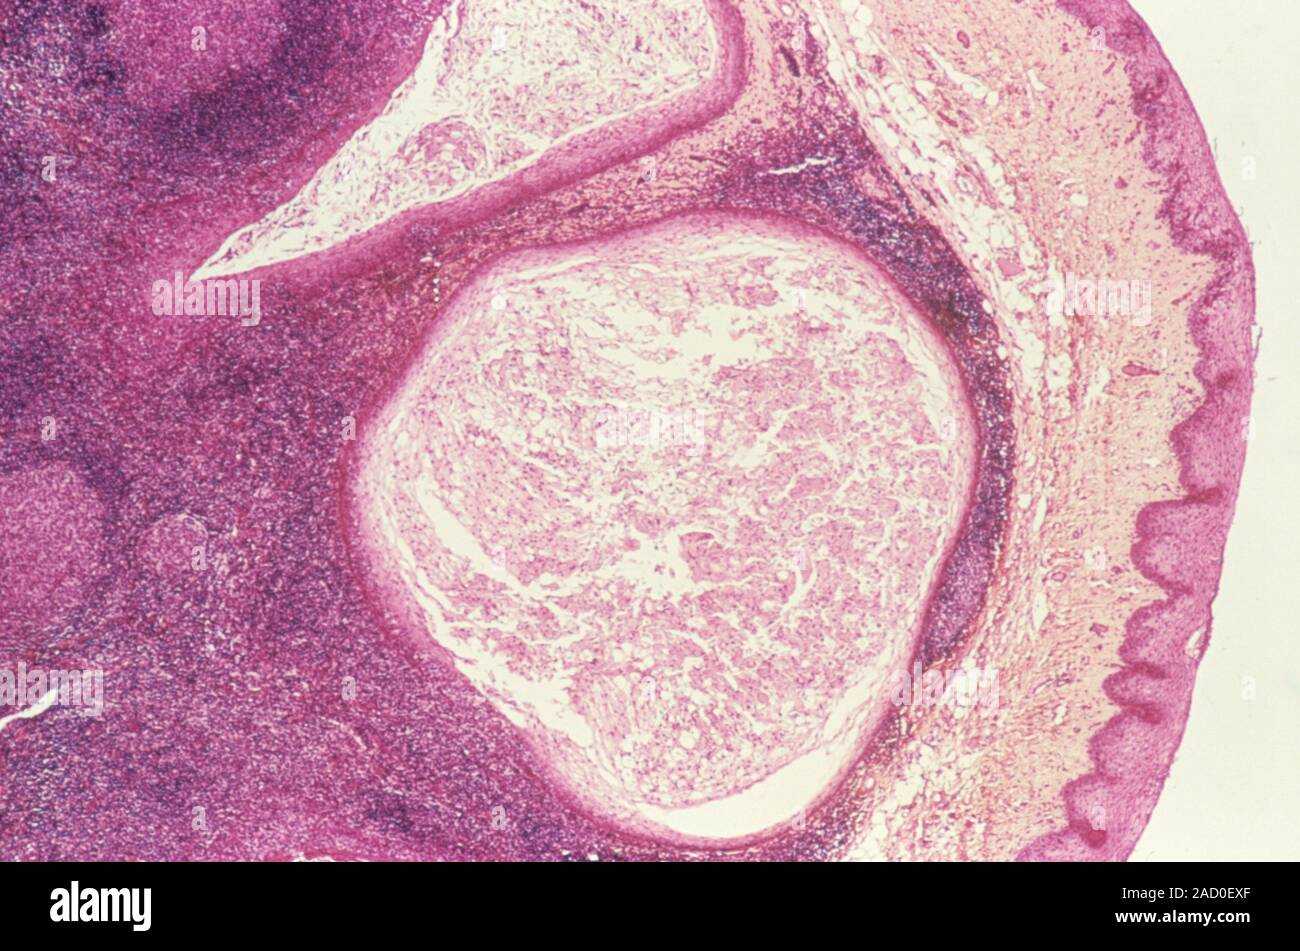 Oral Cyst Light Micrograph Of A Section Through An Epidermoid Cyst